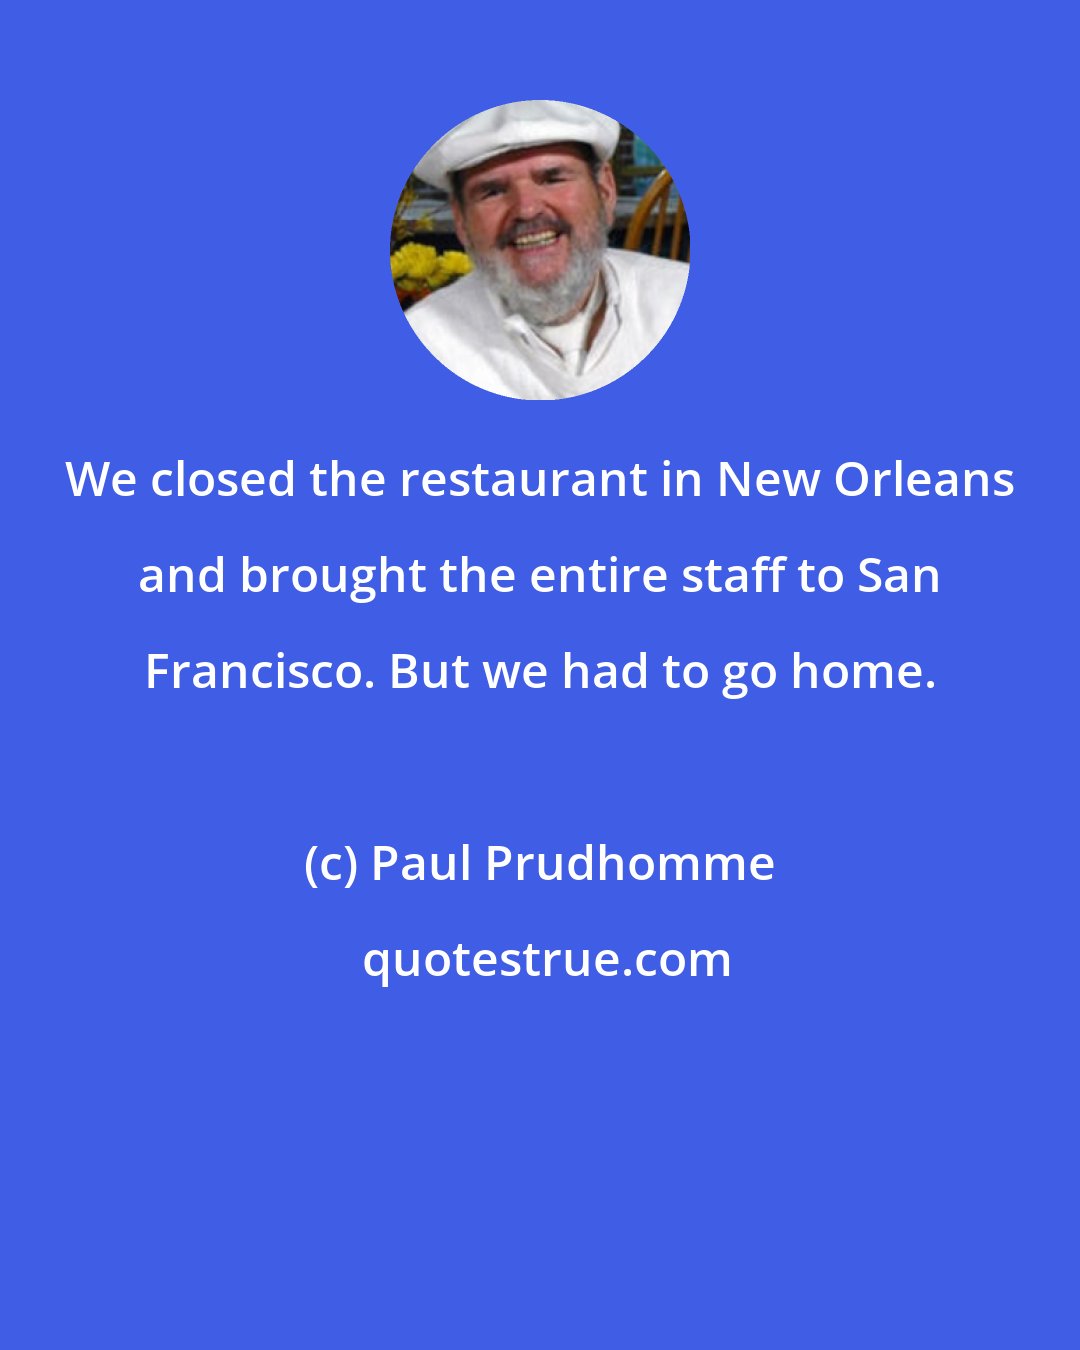 Paul Prudhomme: We closed the restaurant in New Orleans and brought the entire staff to San Francisco. But we had to go home.